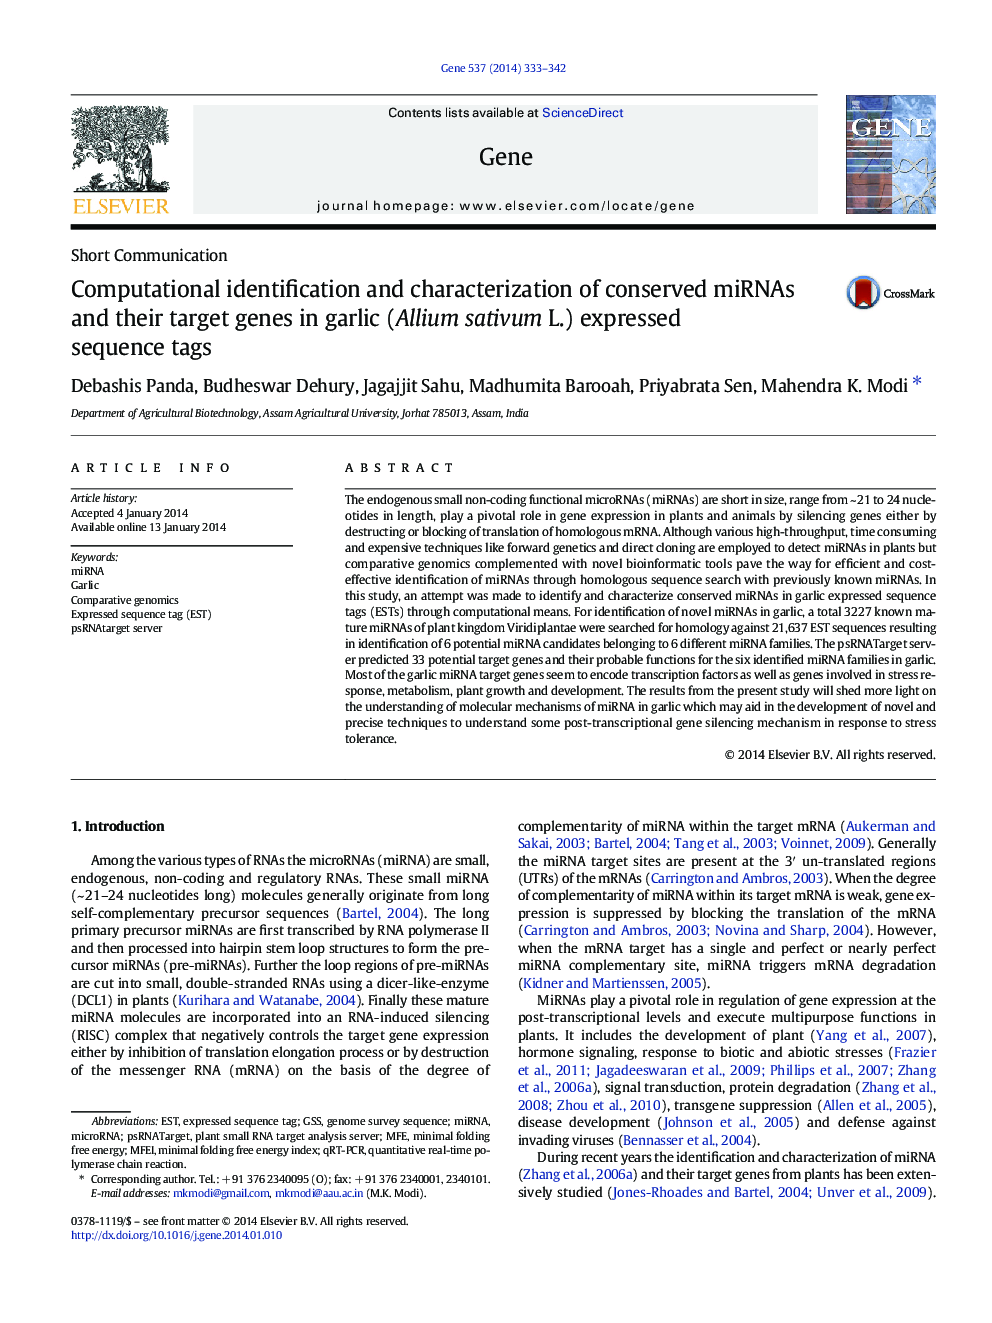 Computational identification and characterization of conserved miRNAs and their target genes in garlic (Allium sativum L.) expressed sequence tags